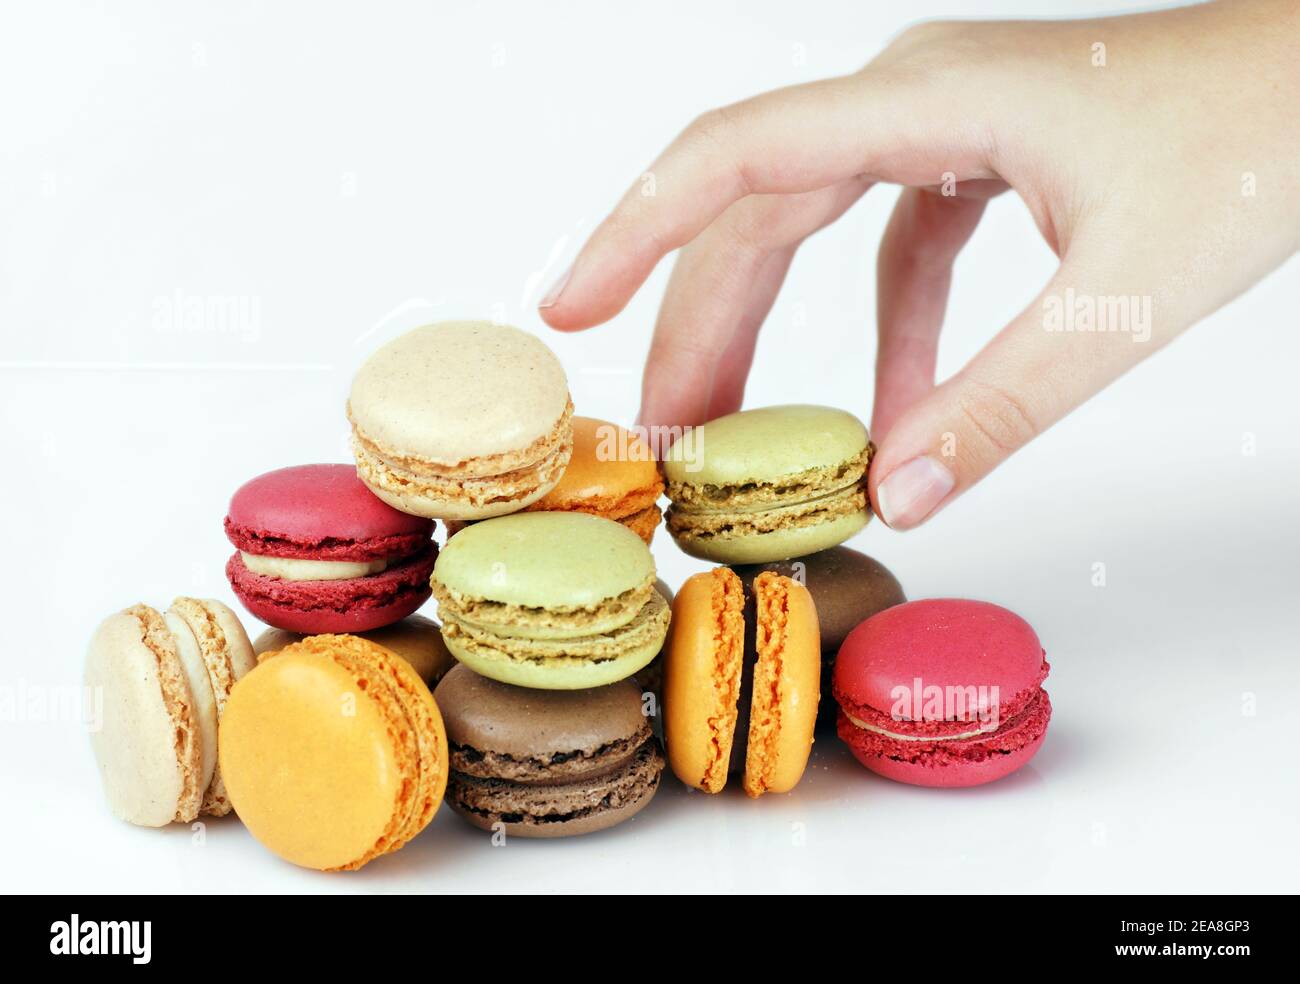 Hand picking up delicious French colorful macarons or macaroons Stock Photo